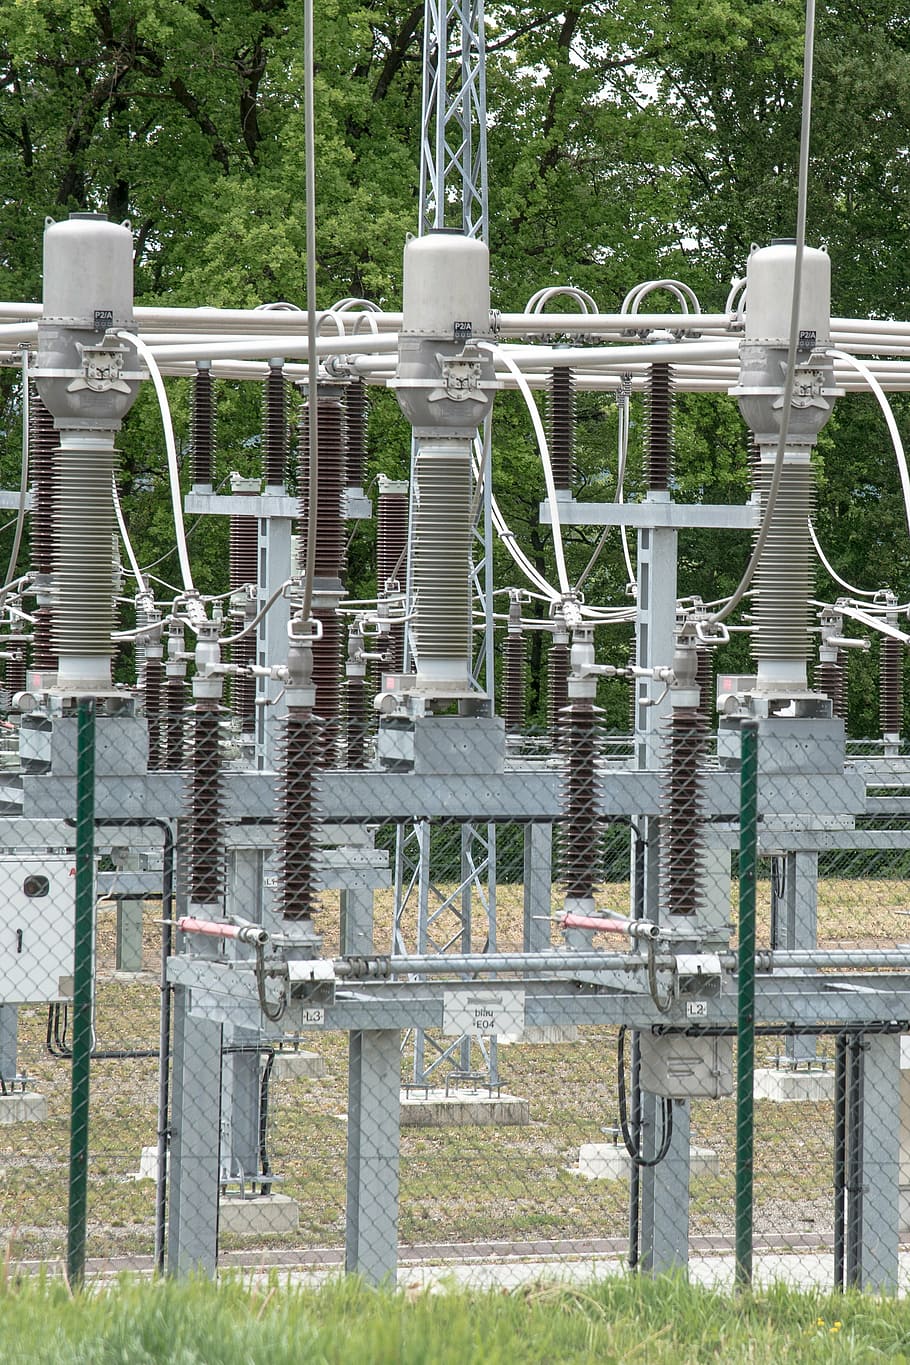 substation, high voltage, energy, current, risk, dangerous, power line, electricity, power supply, solar photovoltaic